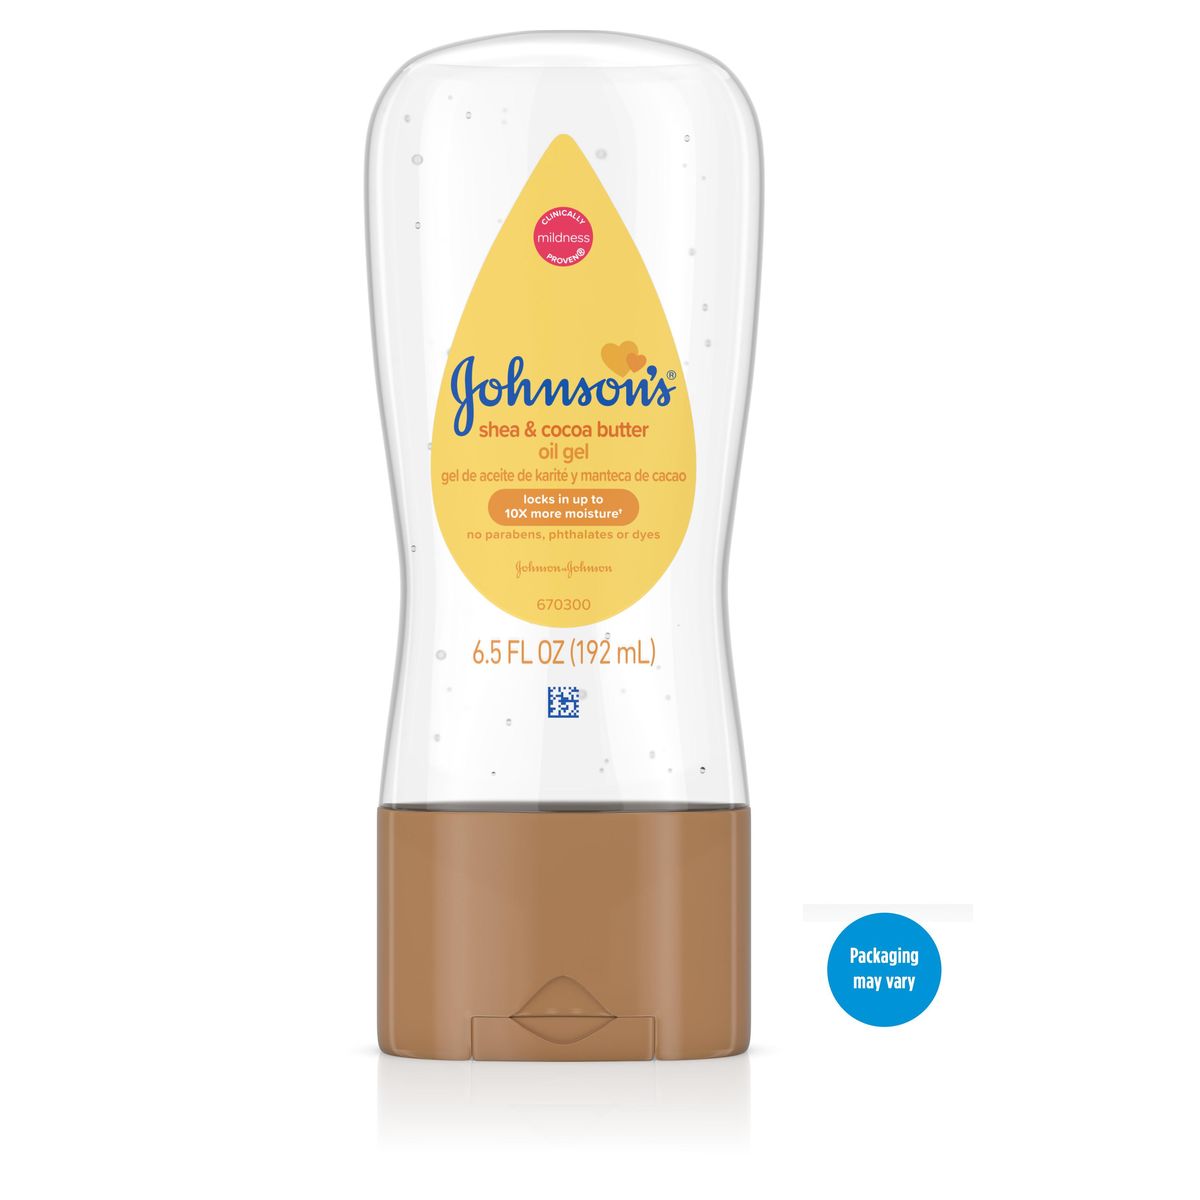 johnson's baby oil gel with shea and cocoa butter